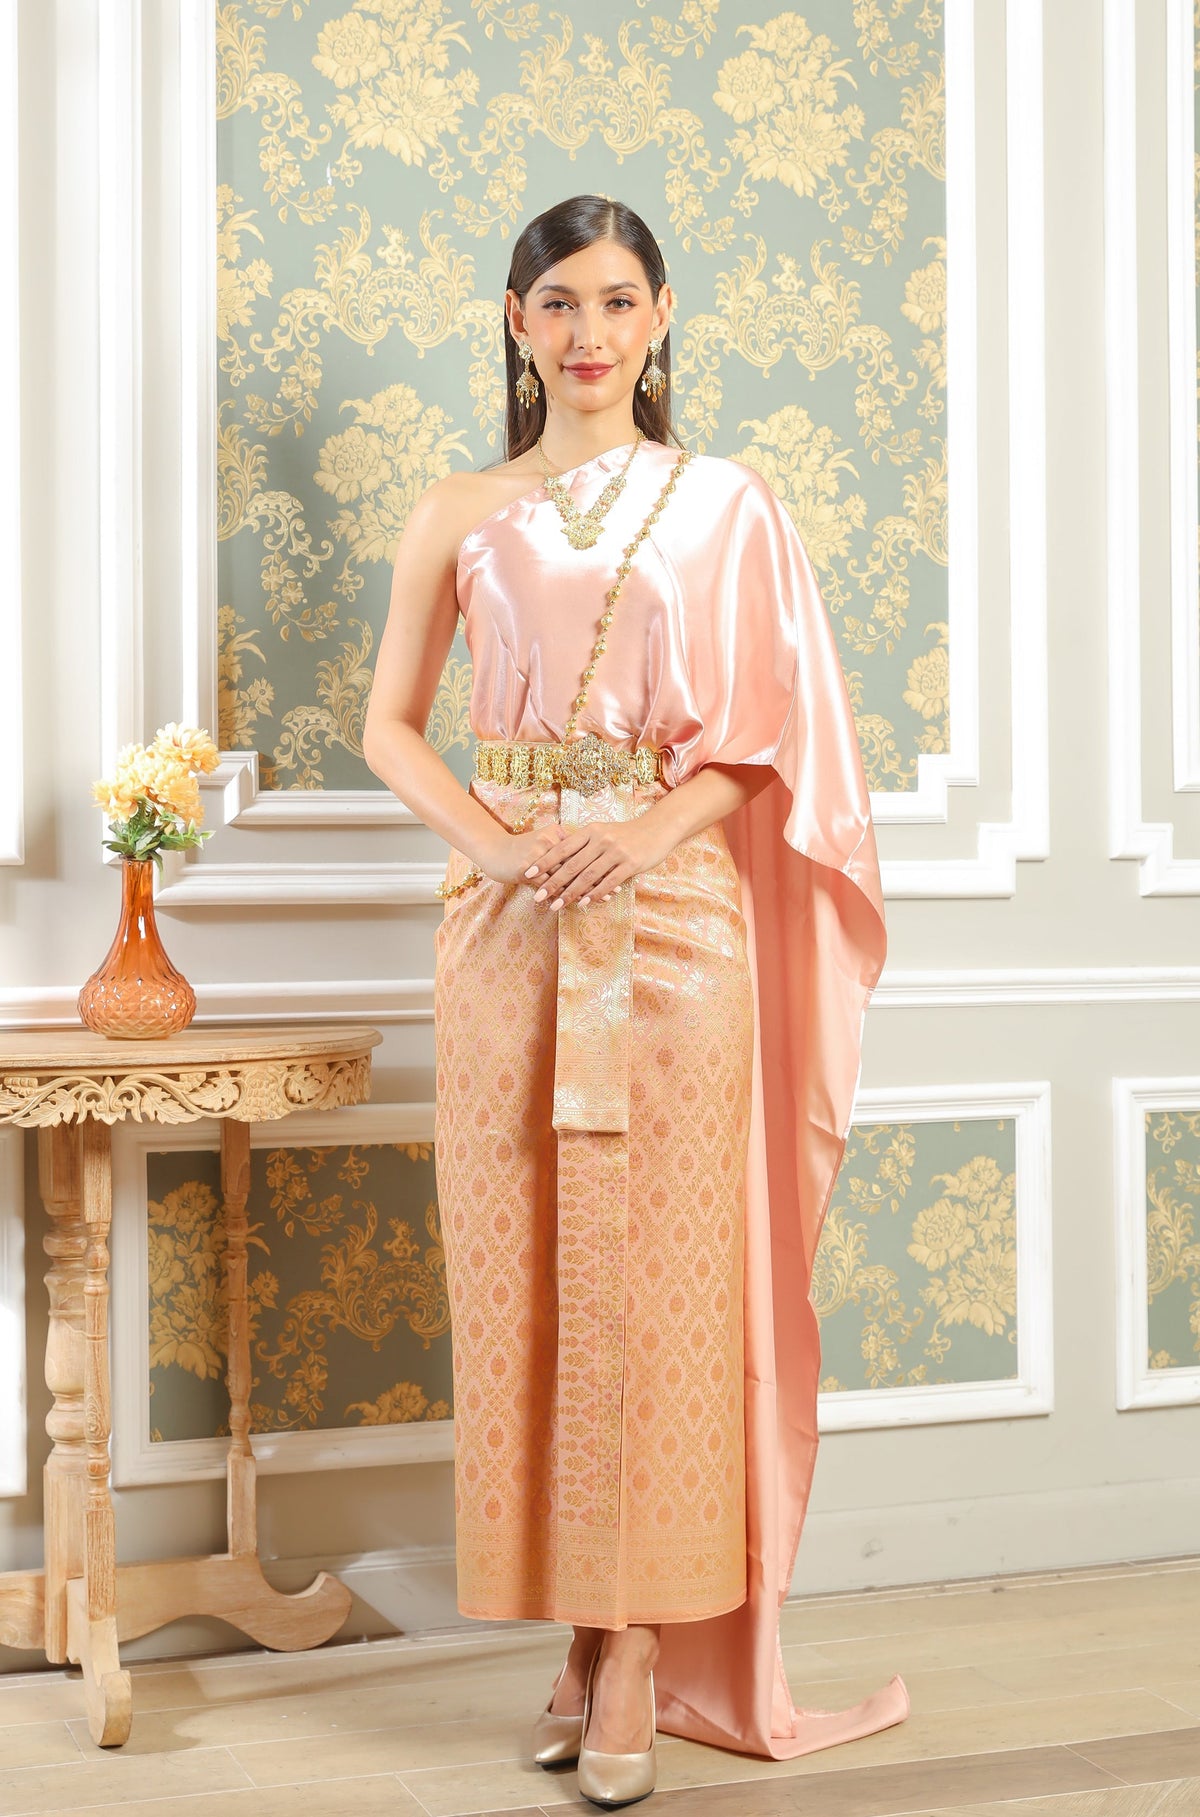 A rose gold traditional Thai outfit for women.